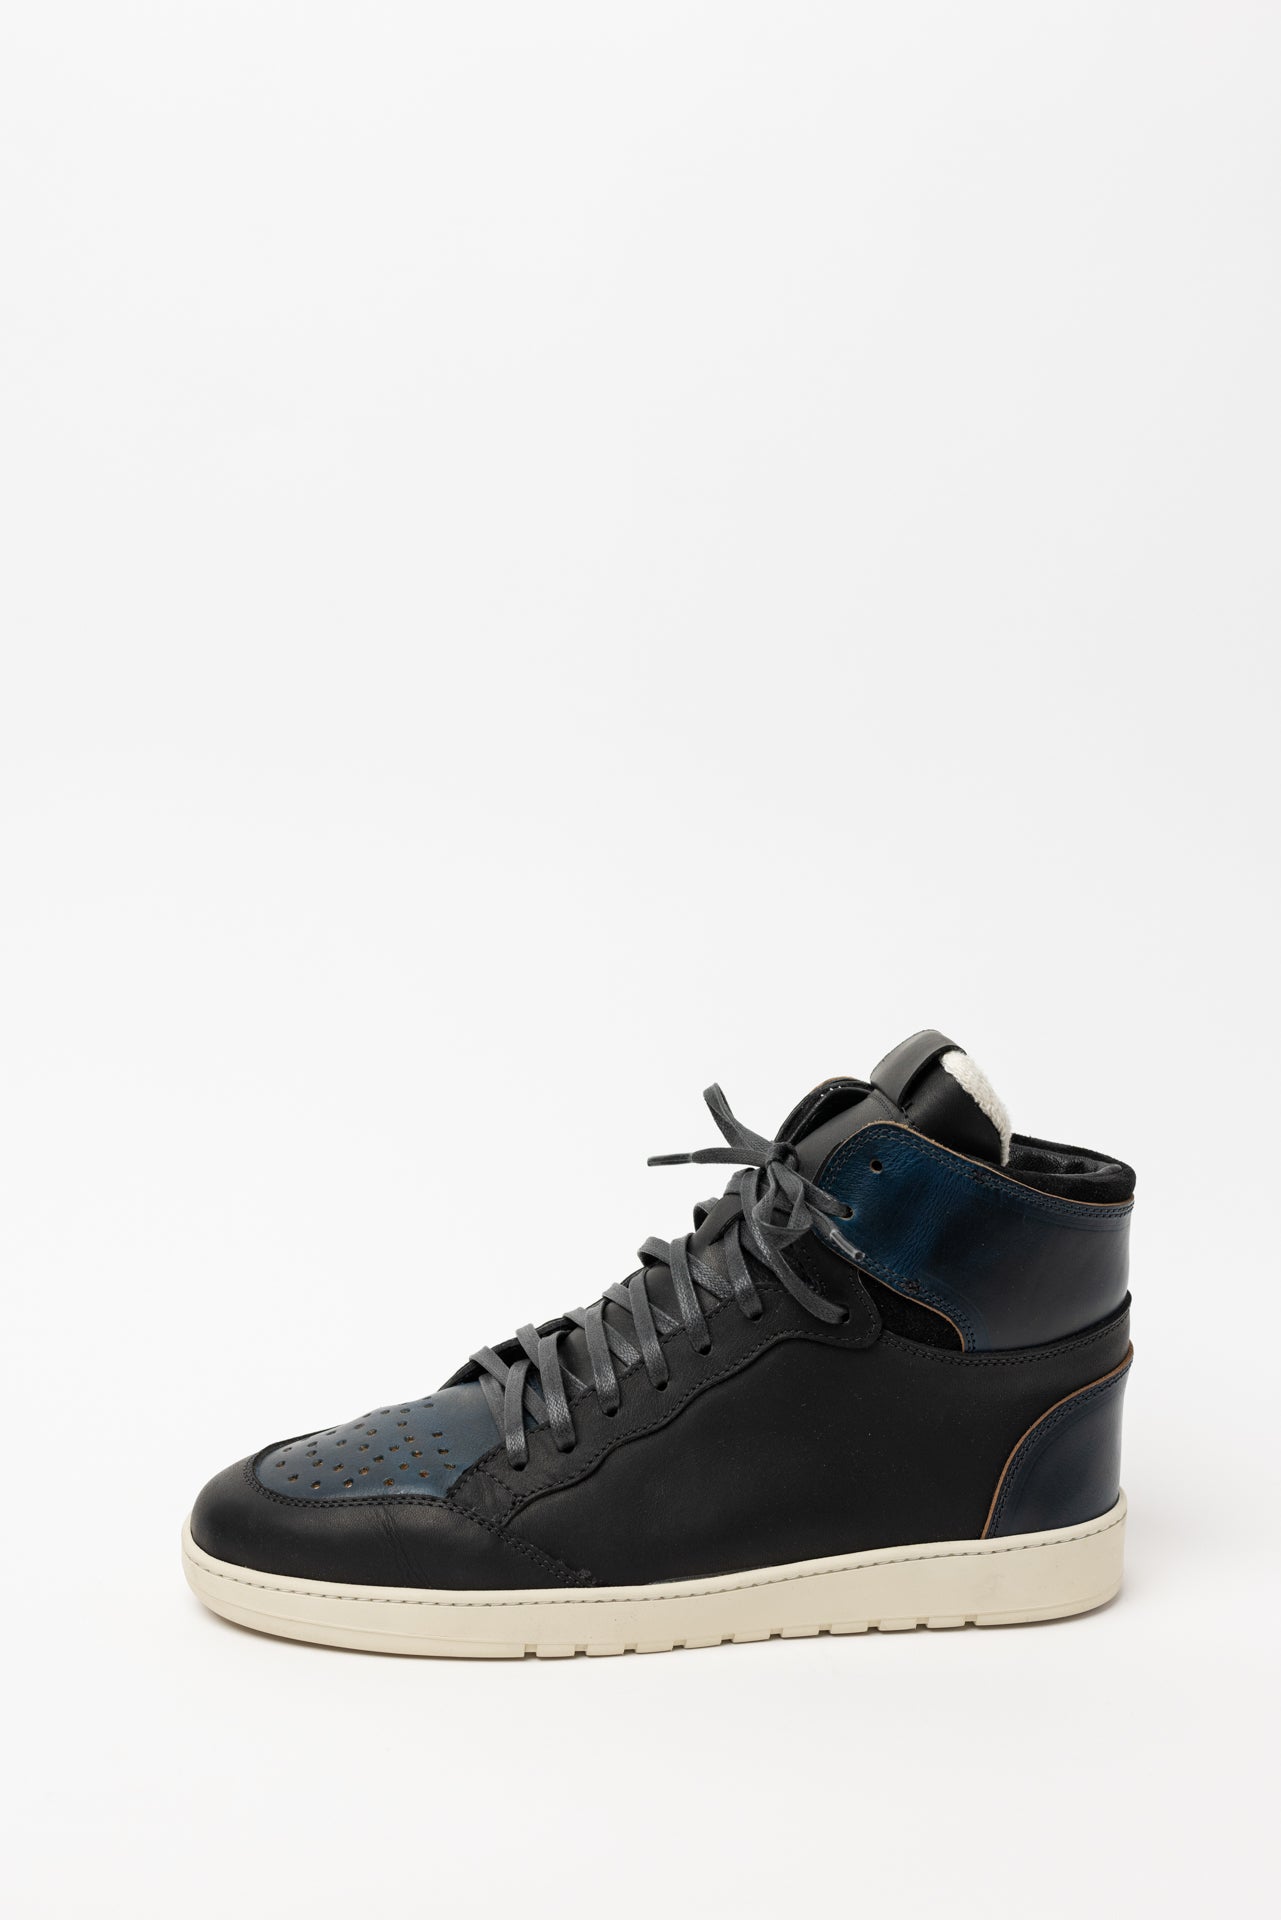 angle hover: Black Horween/Navy Chromexcel  black high top basketball shoes with black and blue leather